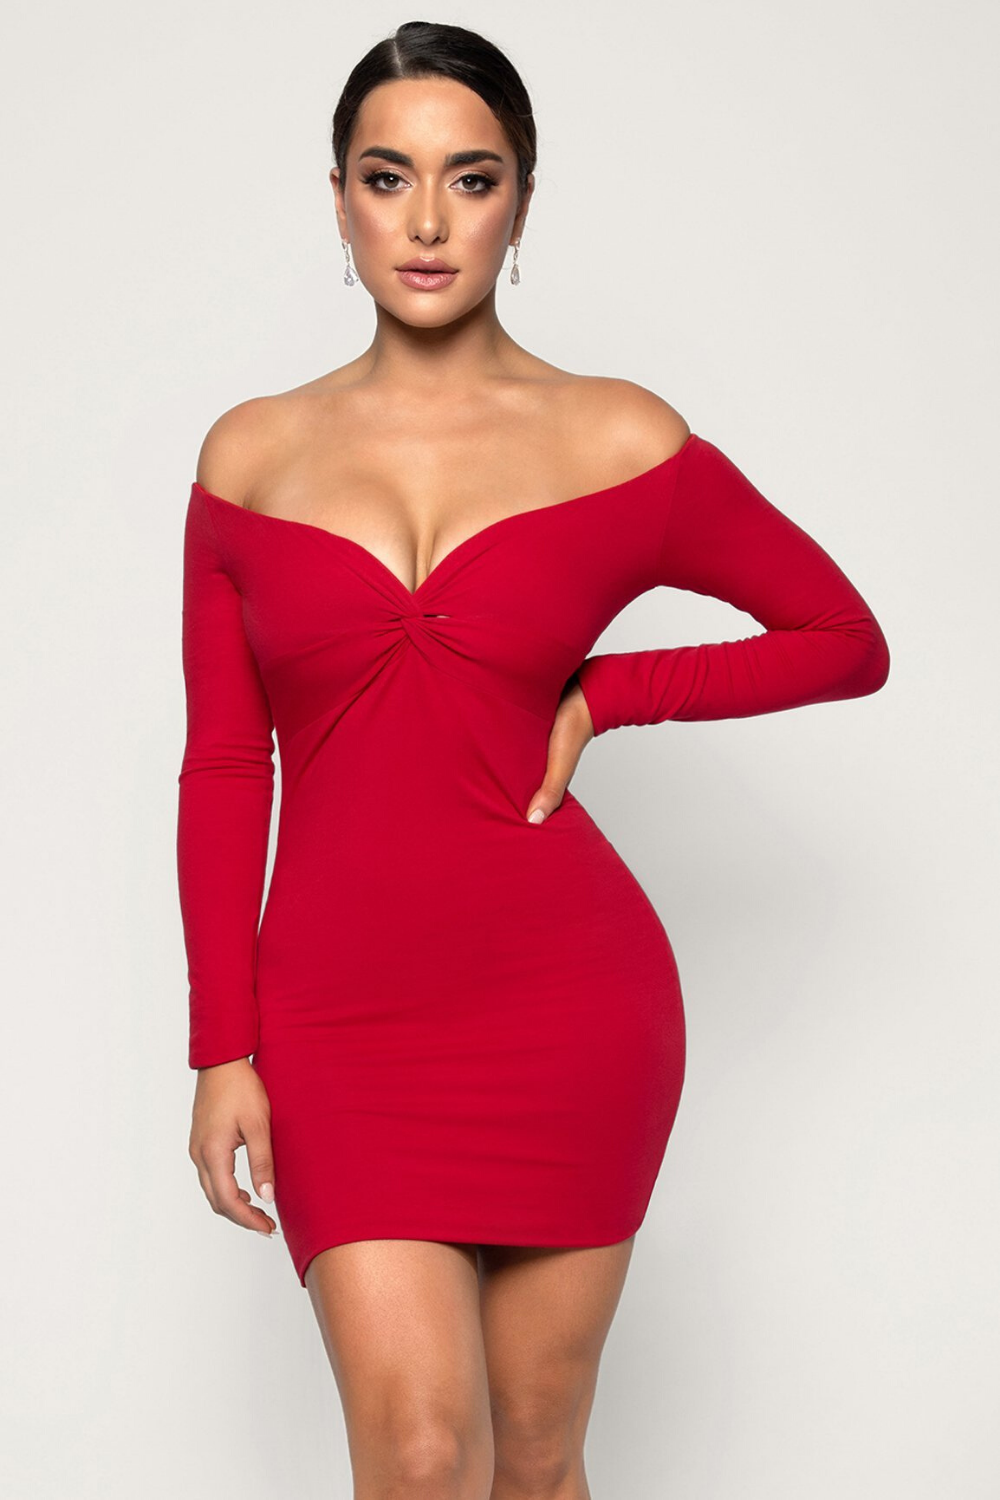 Best Outfit Ideas with Red Mini Dress - Just for Fun